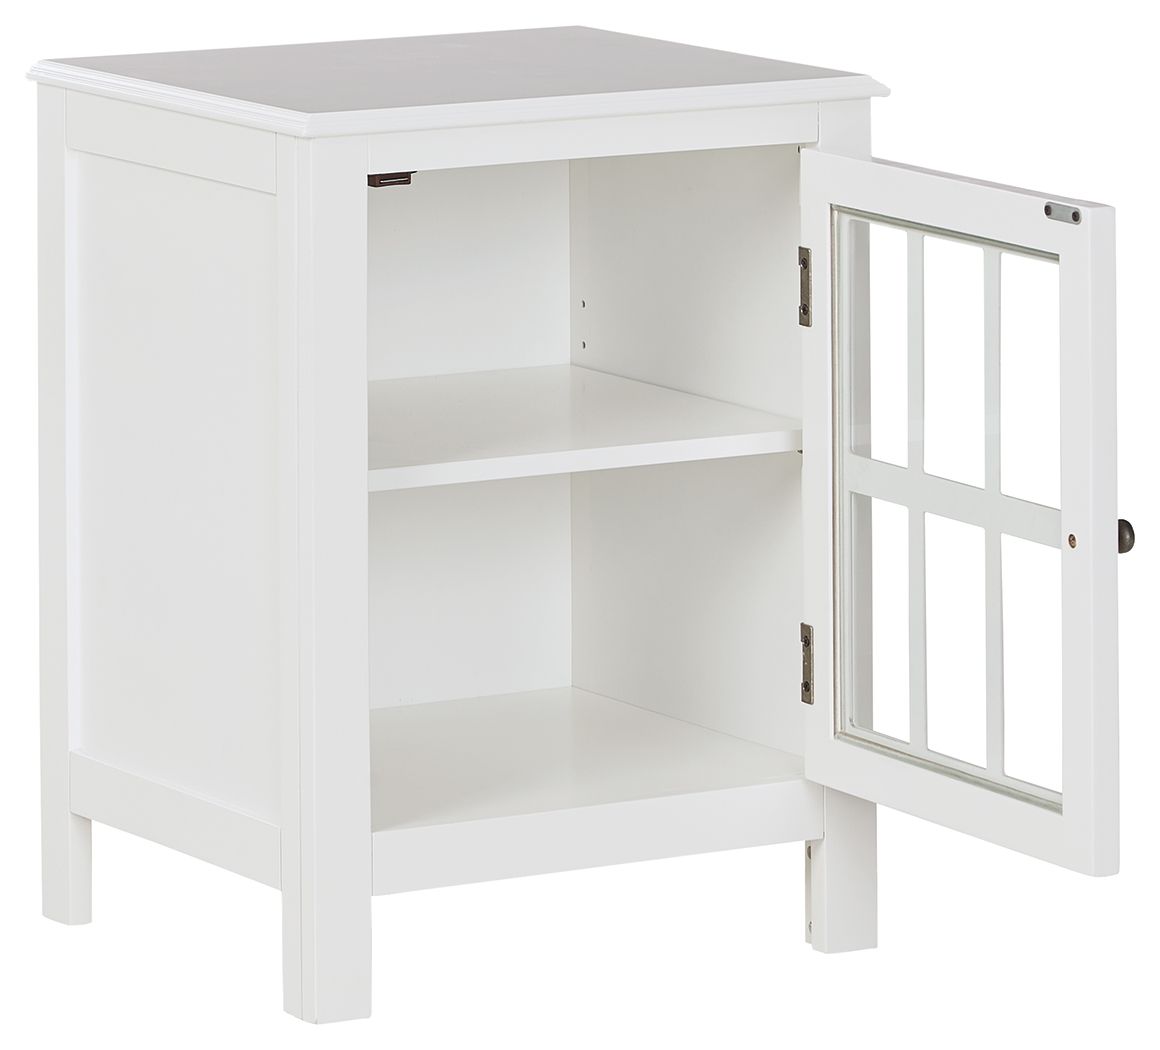 Opelton - Accent Cabinet - Tony's Home Furnishings